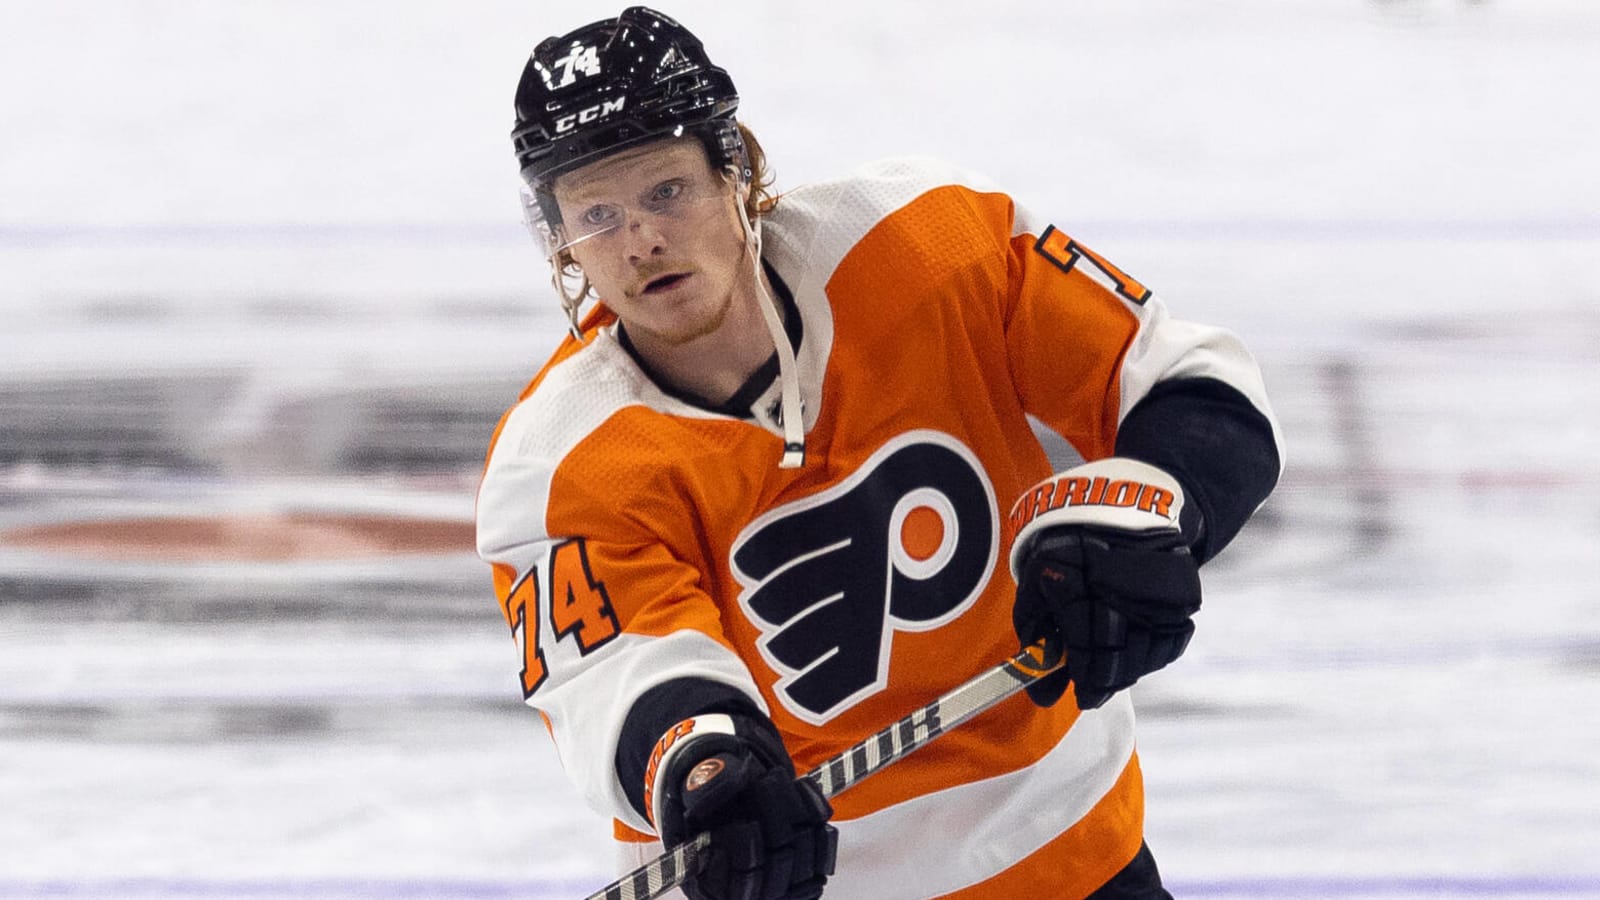 Flyers place winger Owen Tippett on IR with upper-body injury